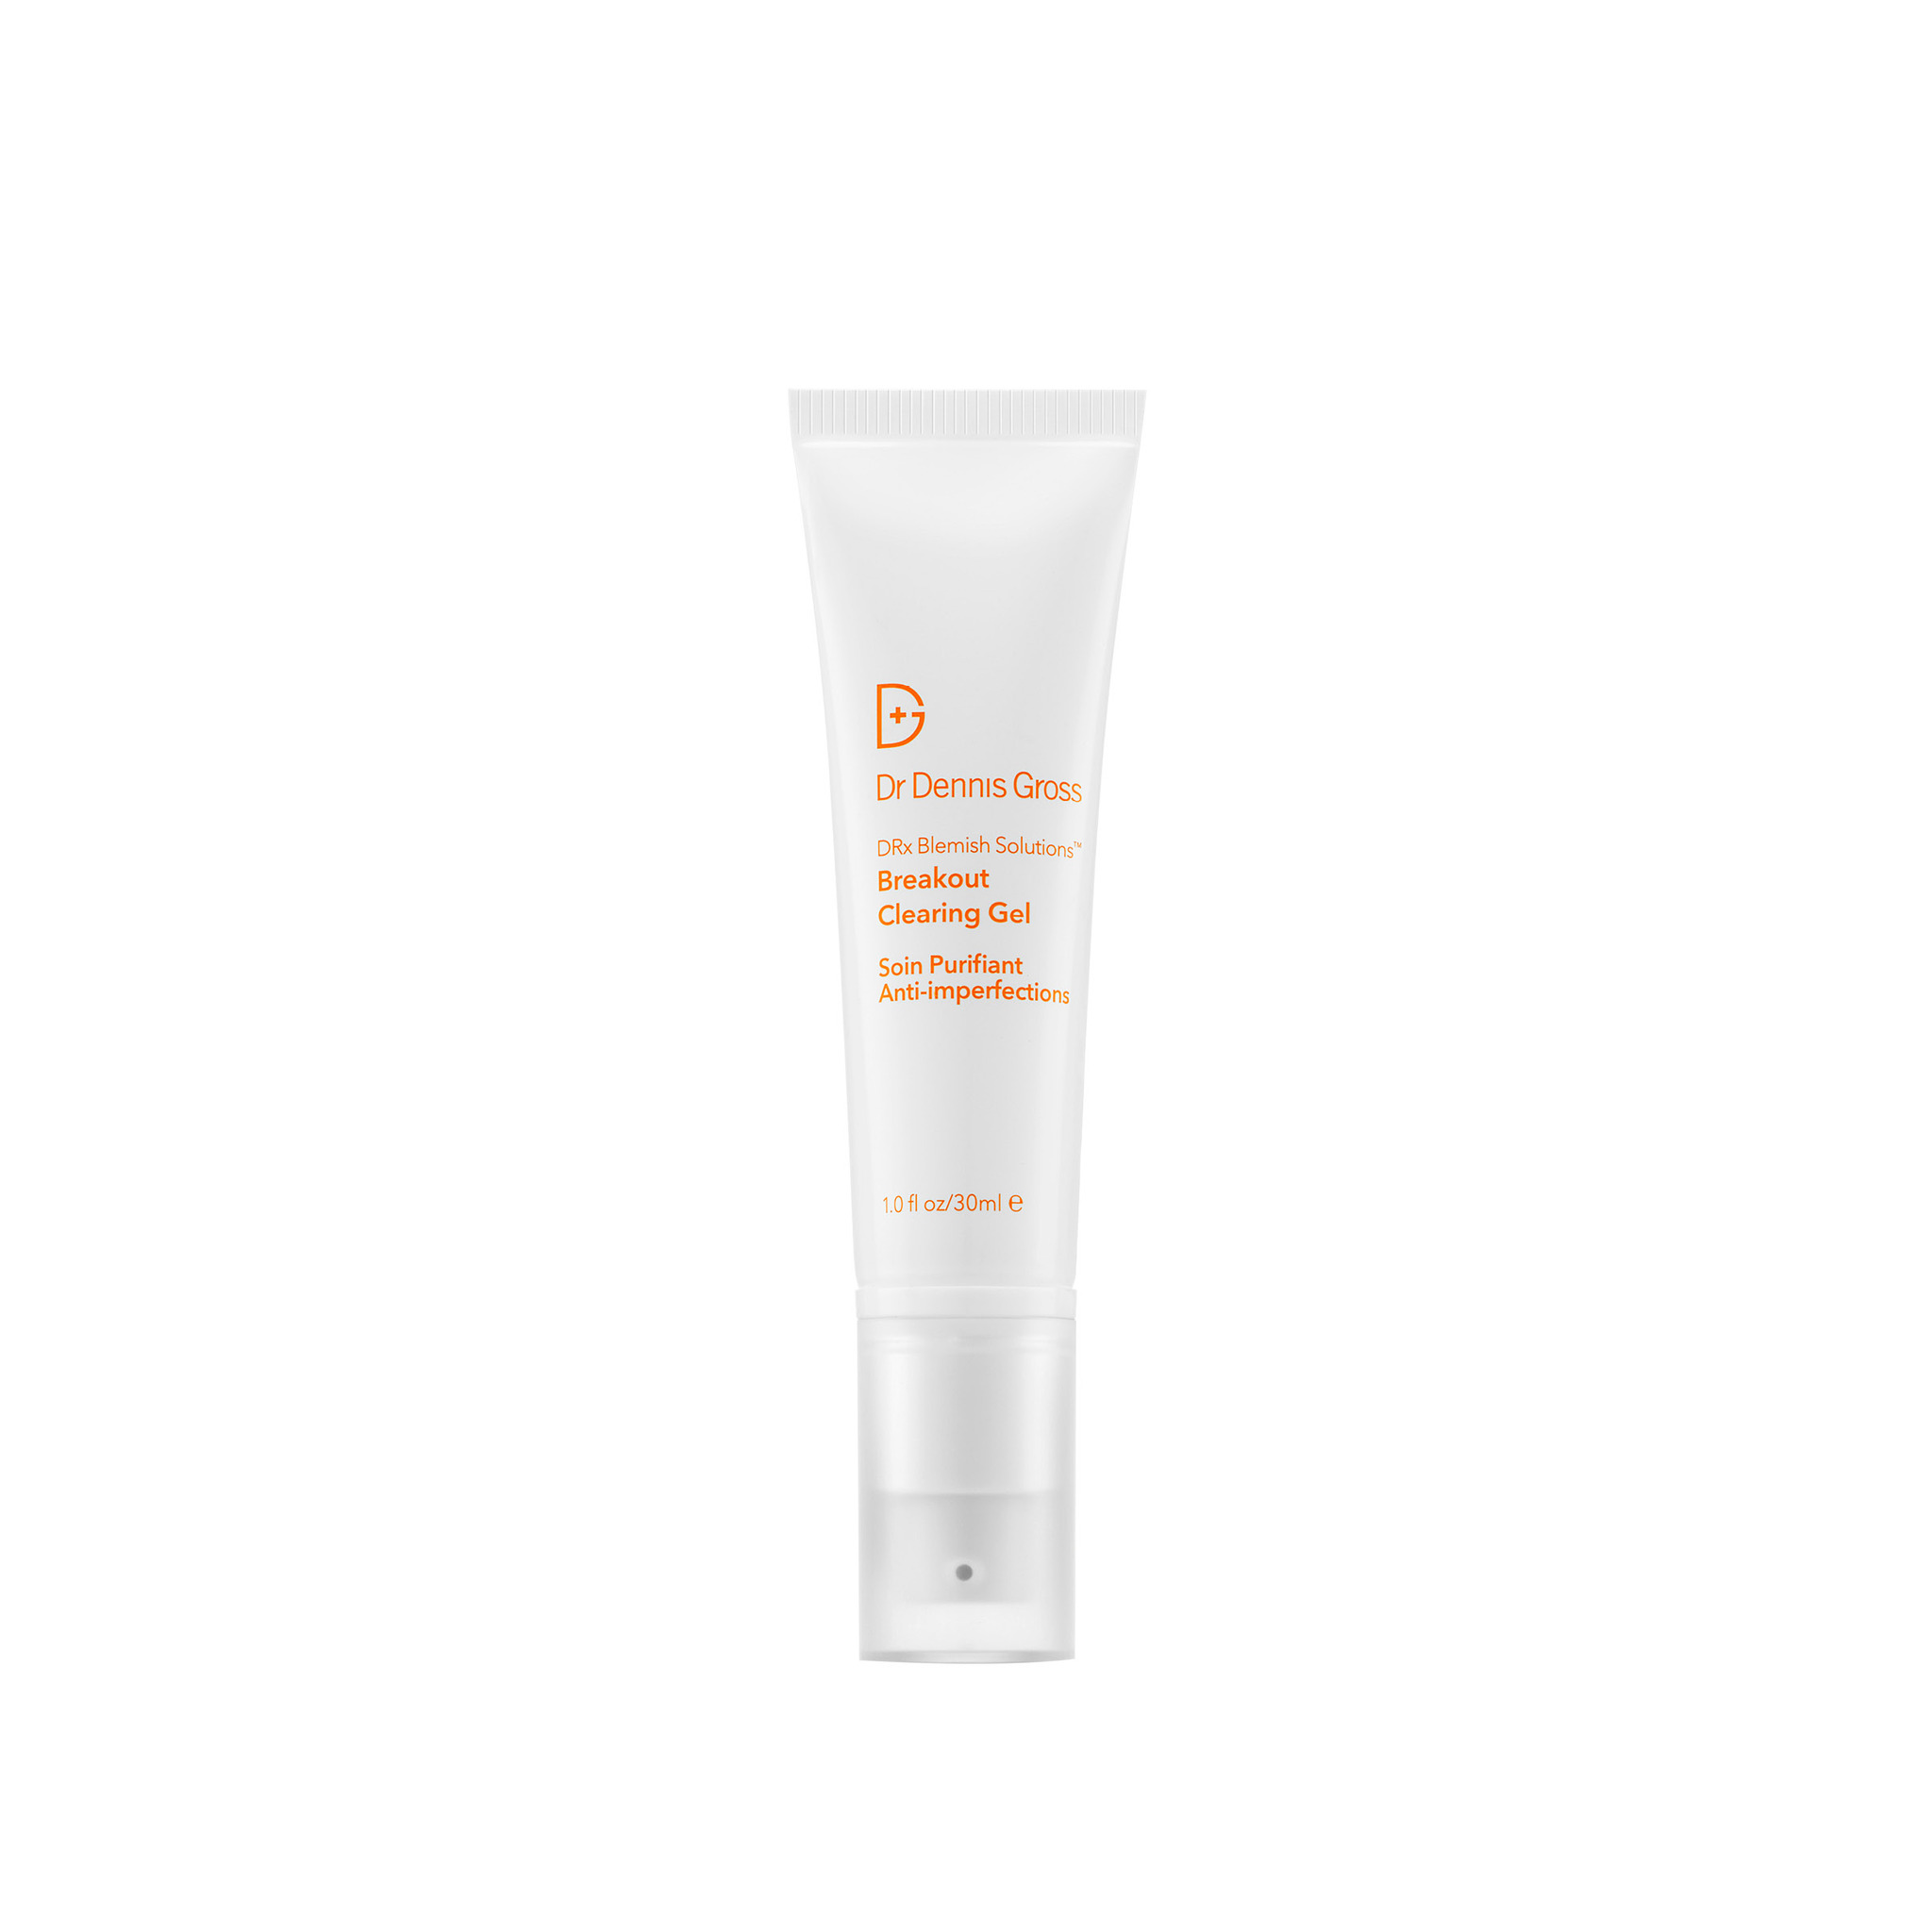 DRx Blemish Solutions Breakout Clearing gel